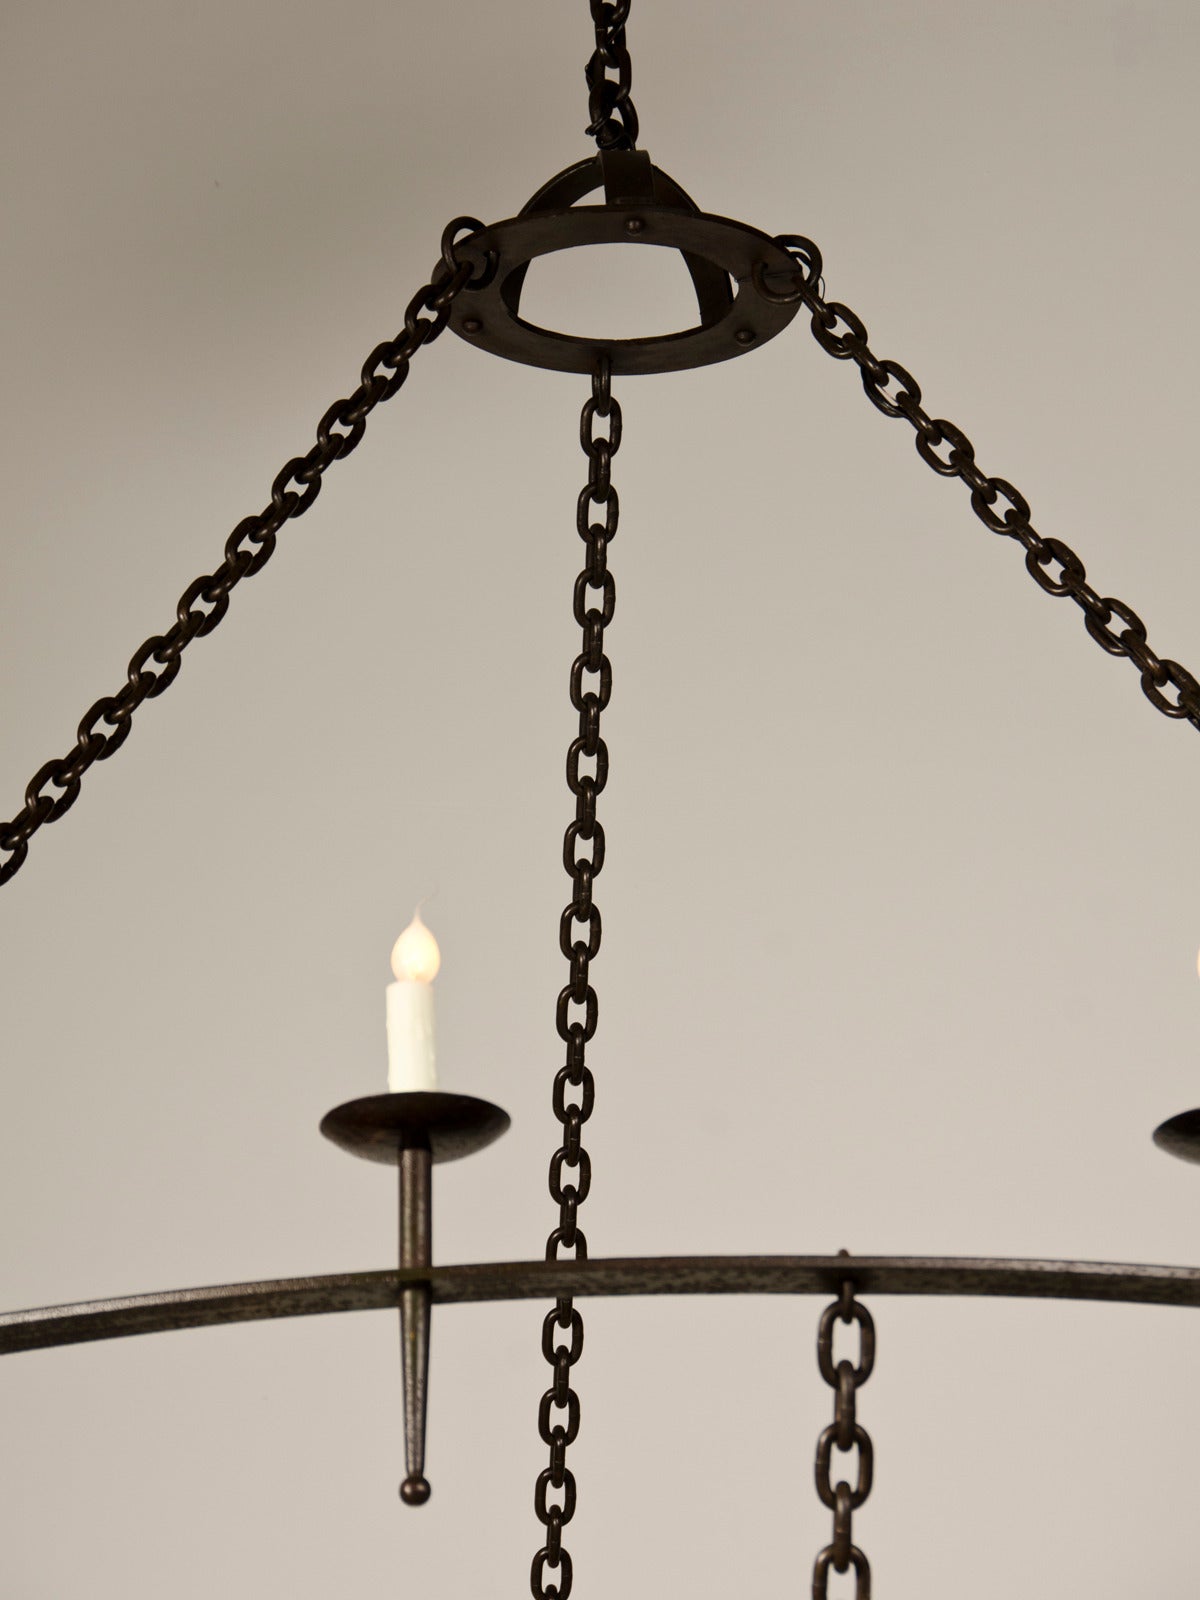 A striking two tier iron chandelier from France c.1920. The elegant and modern design of this enormous antique French iron chandelier from the early twentieth century is truly remarkable. The upper circular disk of solid iron is suspended from three